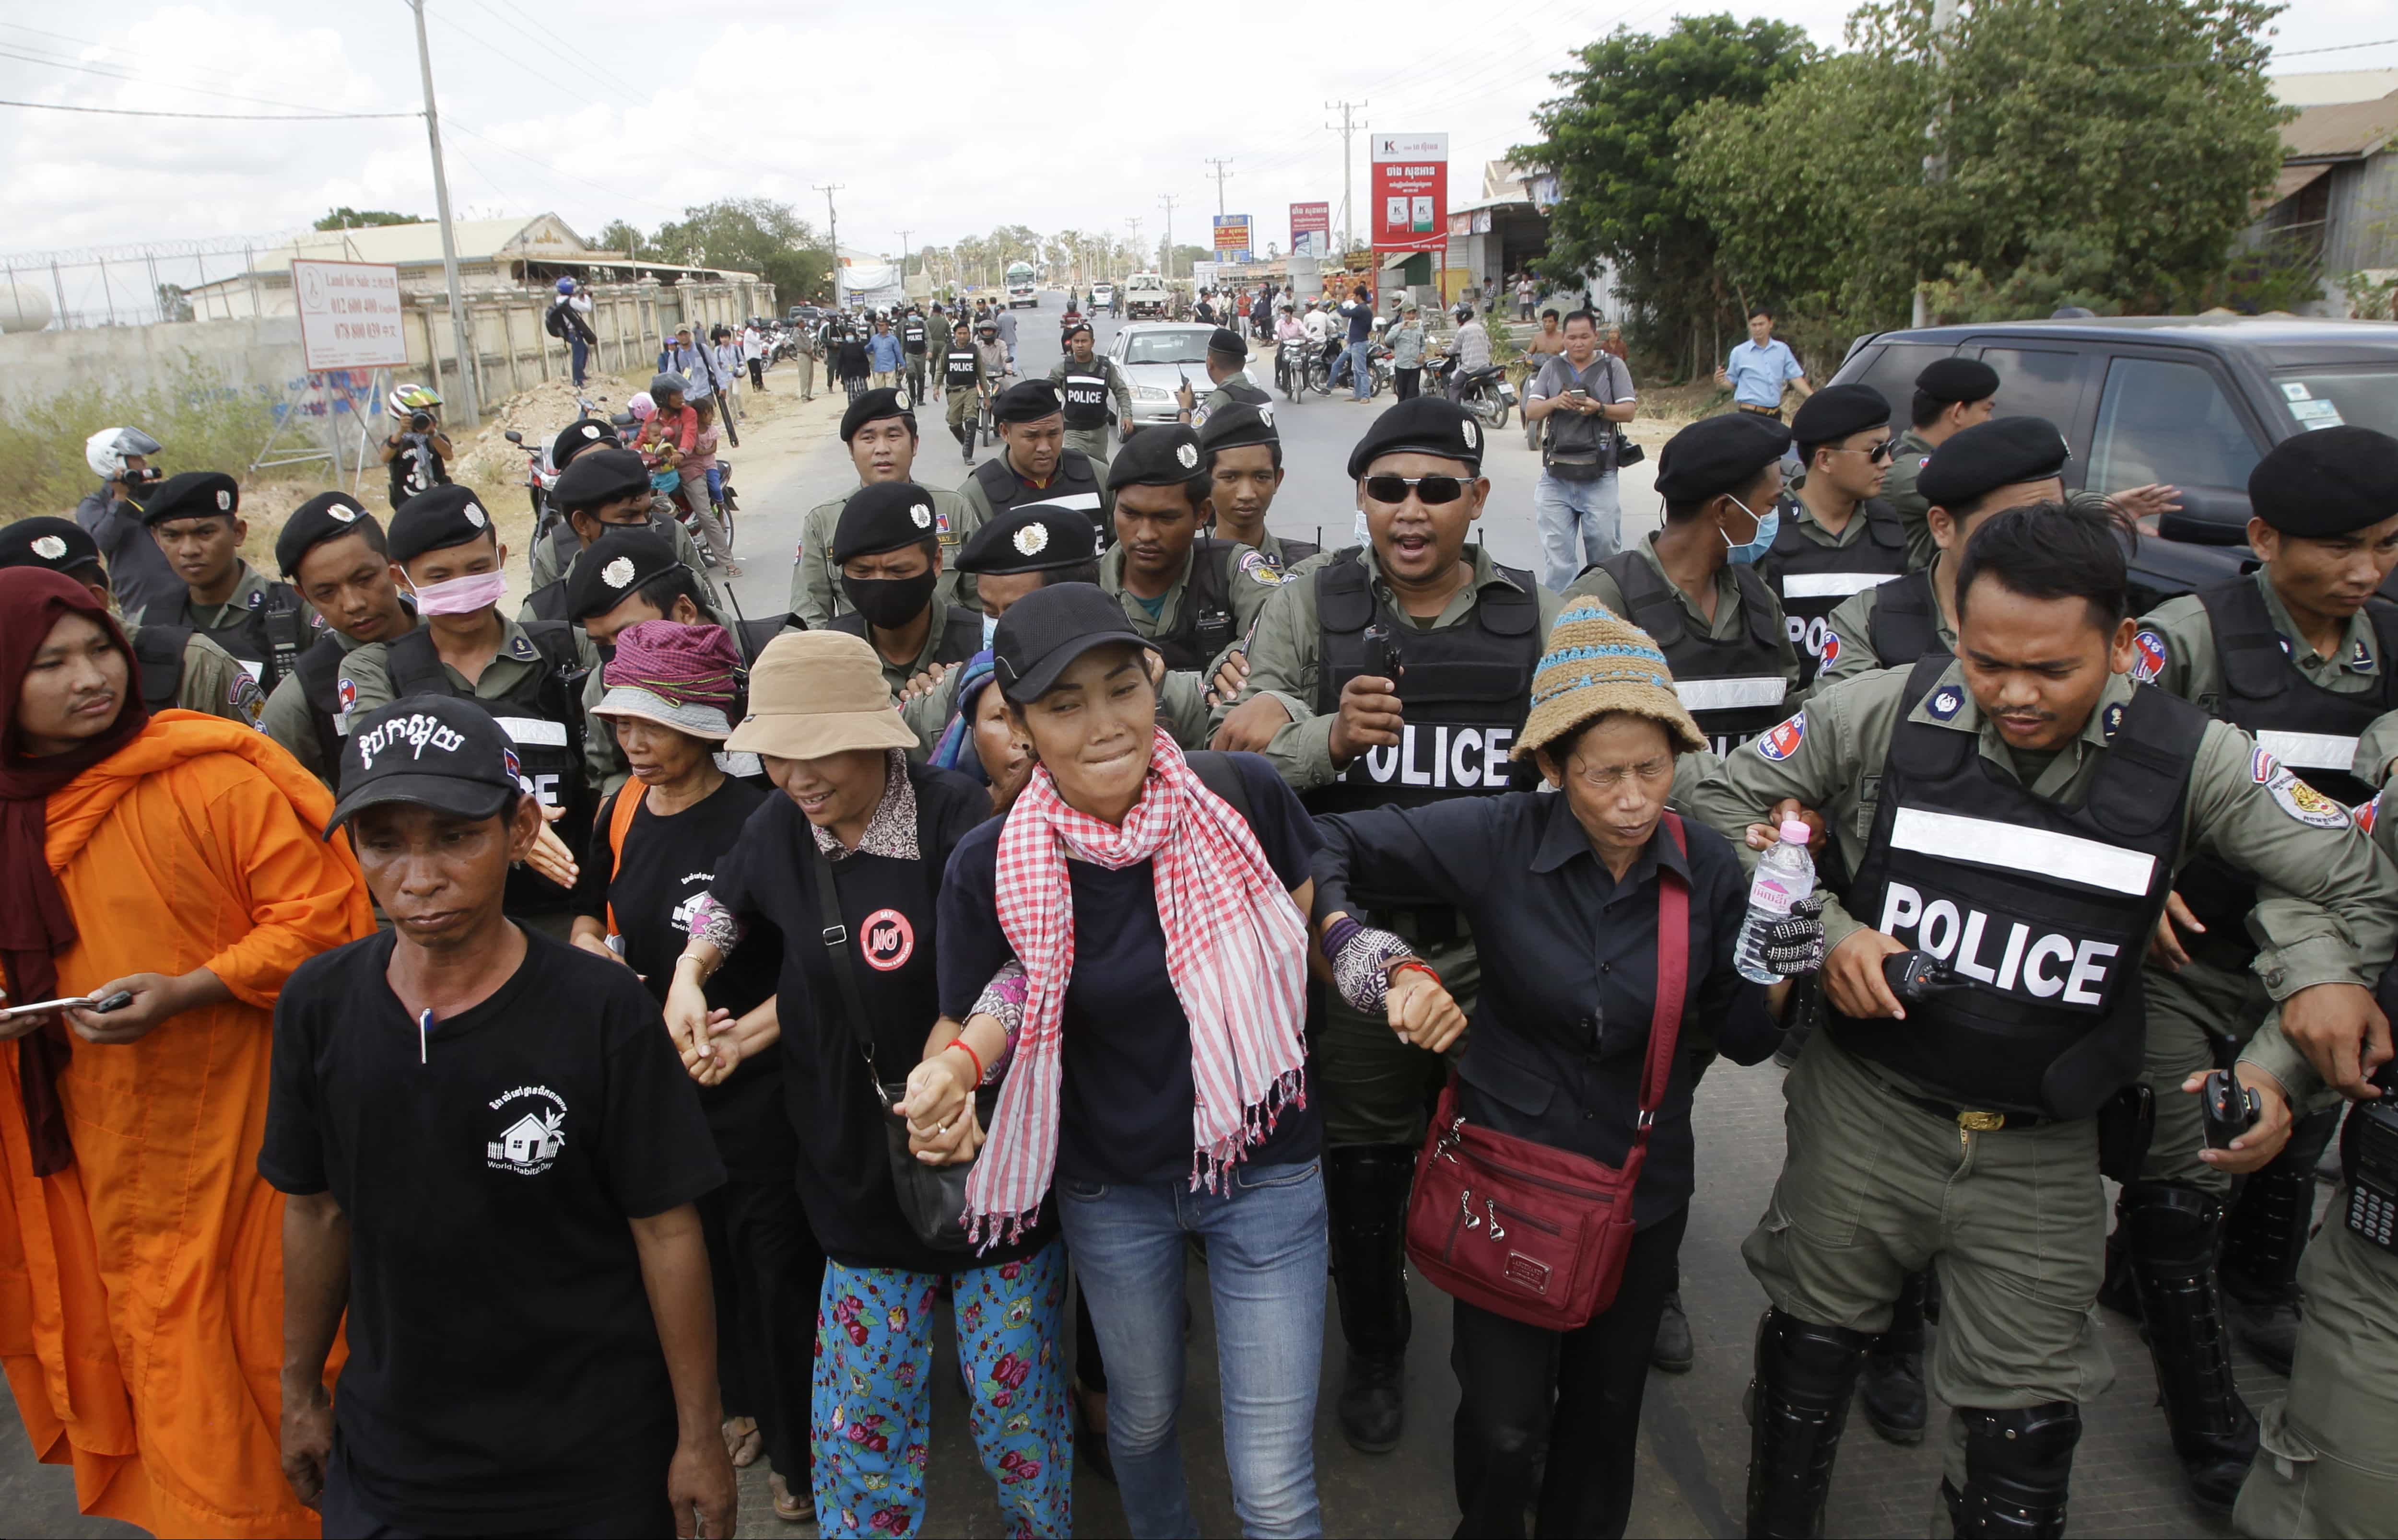 Cambodian civil rights supporters are forcibly directed by riot police as they march in protest of charges brought against local rights activists near Prey Sar prison, Cambodia, 9 May 2016, AP Photo/Heng Sinith